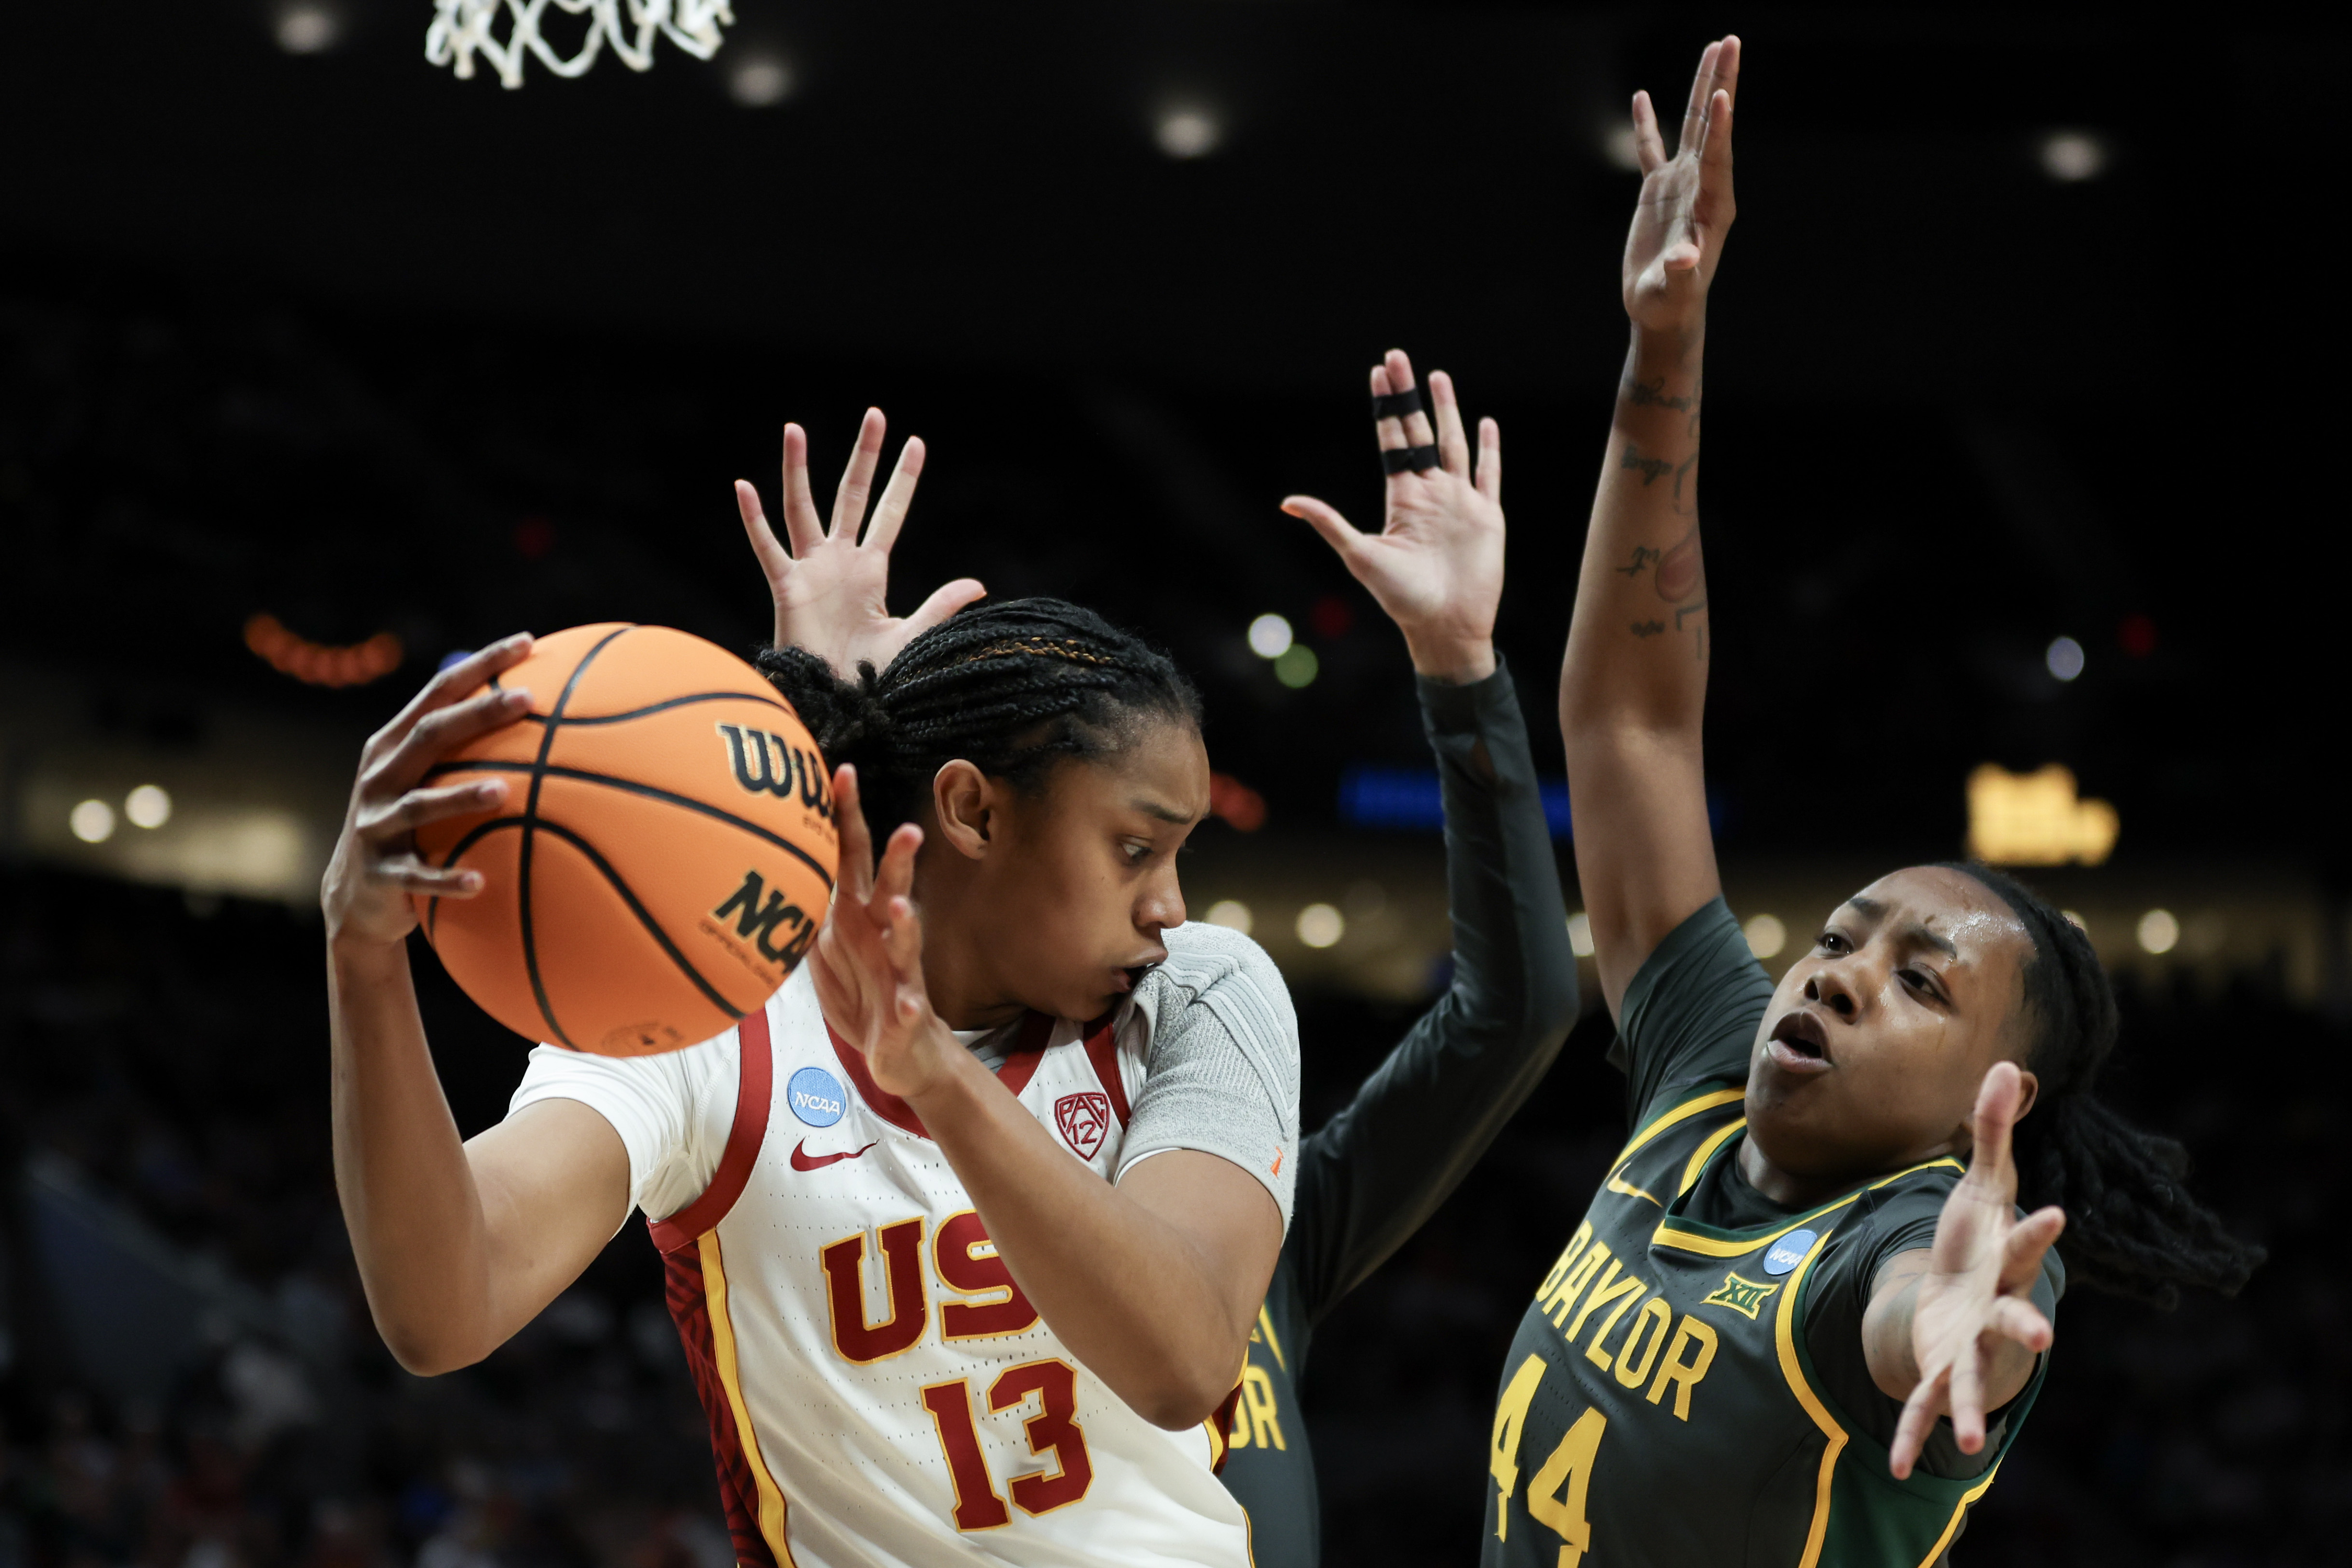 USC's Rayah Marshall Postgame Interview